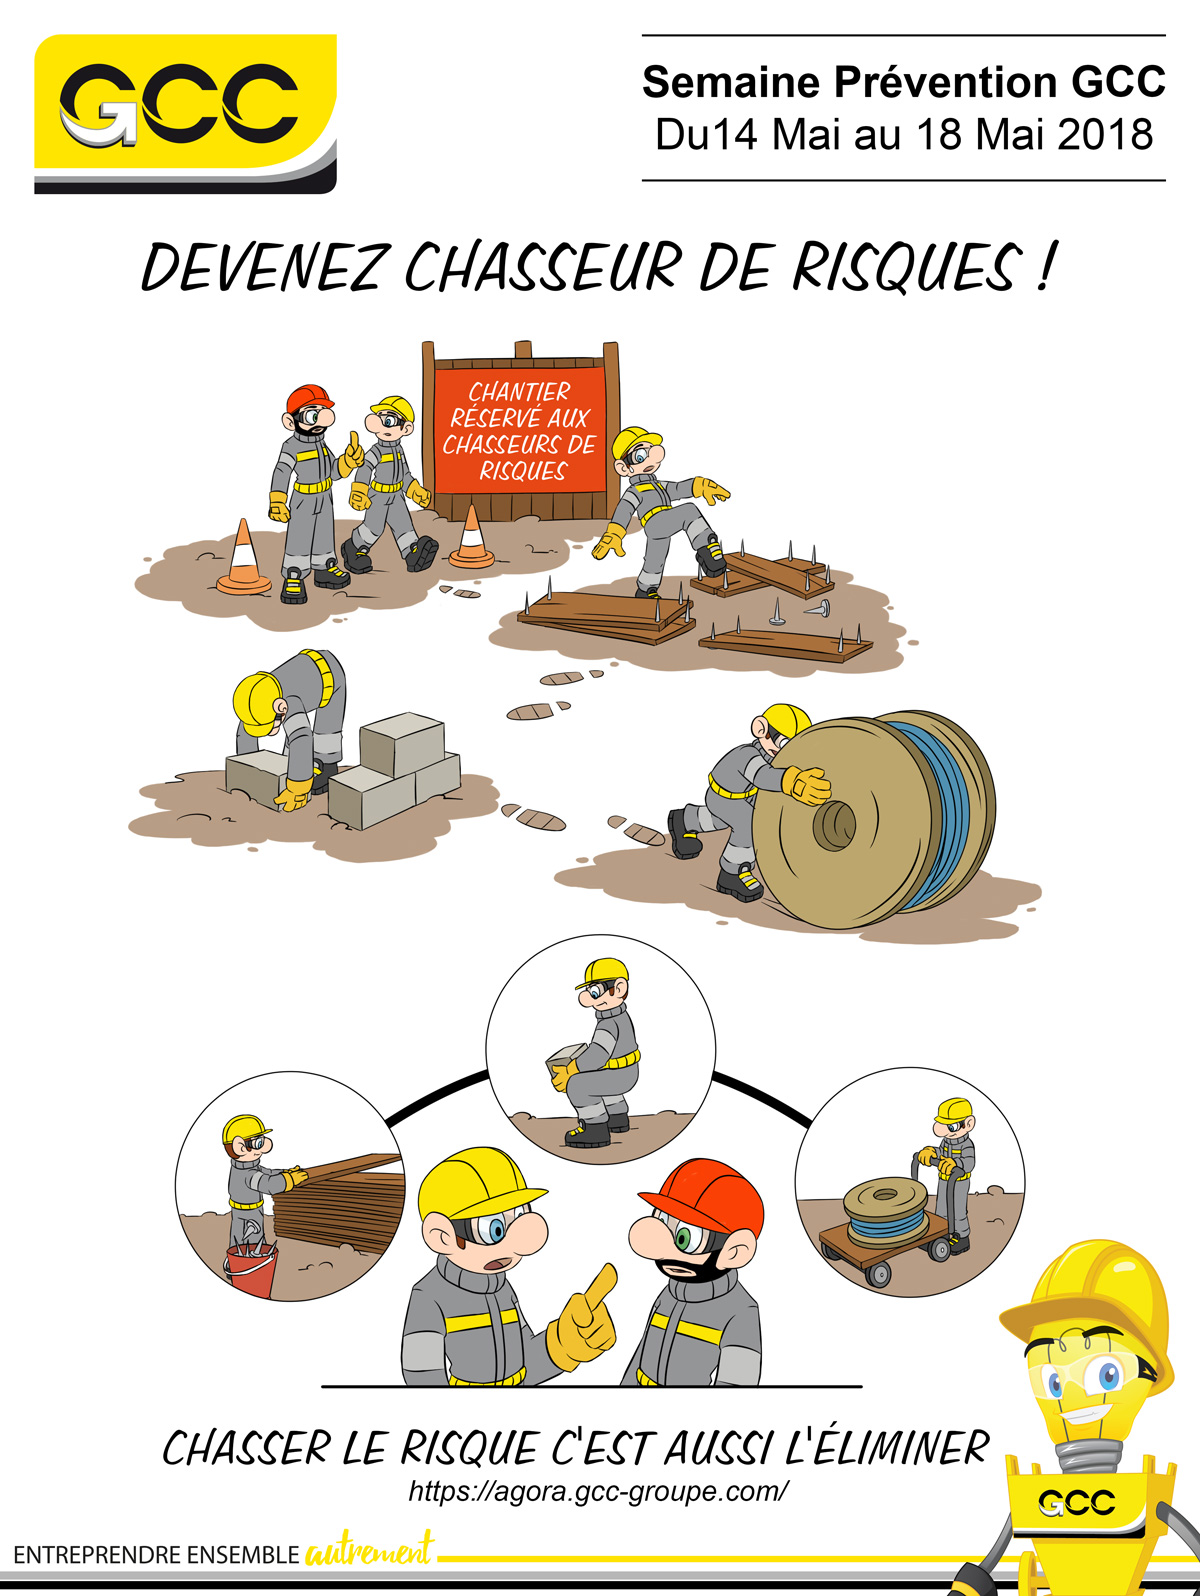 Prevention poster containing cartoon illustrations of the mascots and dangerous situations for employees on the construction site